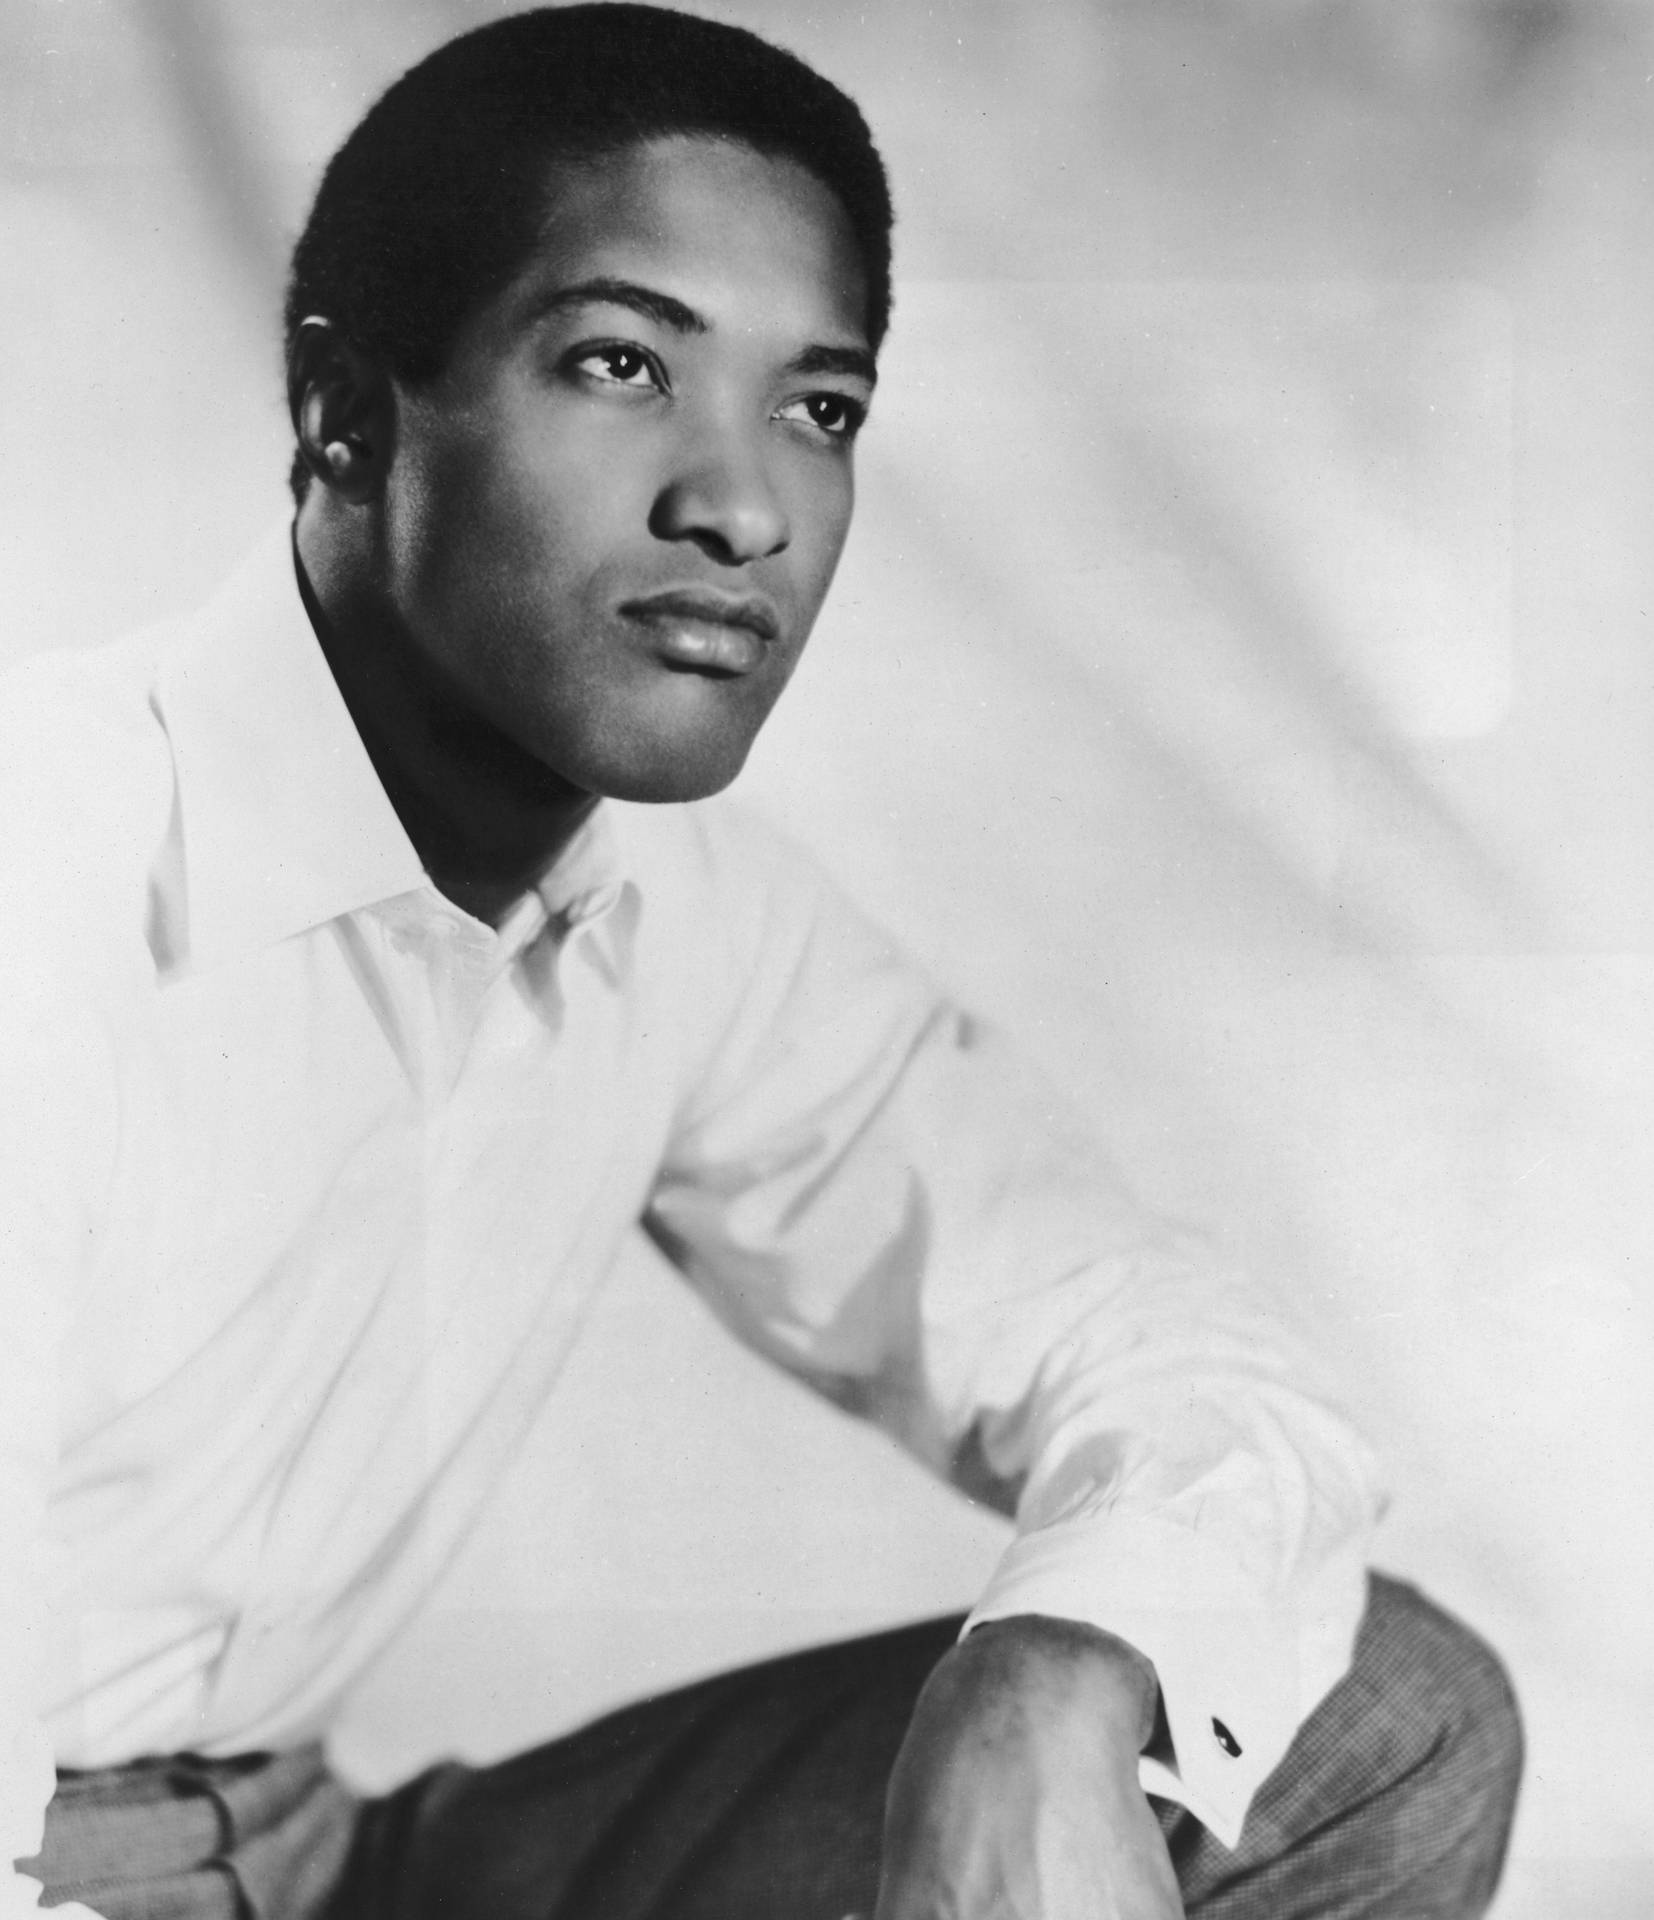 Sam Cooke performing "A Change is Gonna Come" Wallpaper